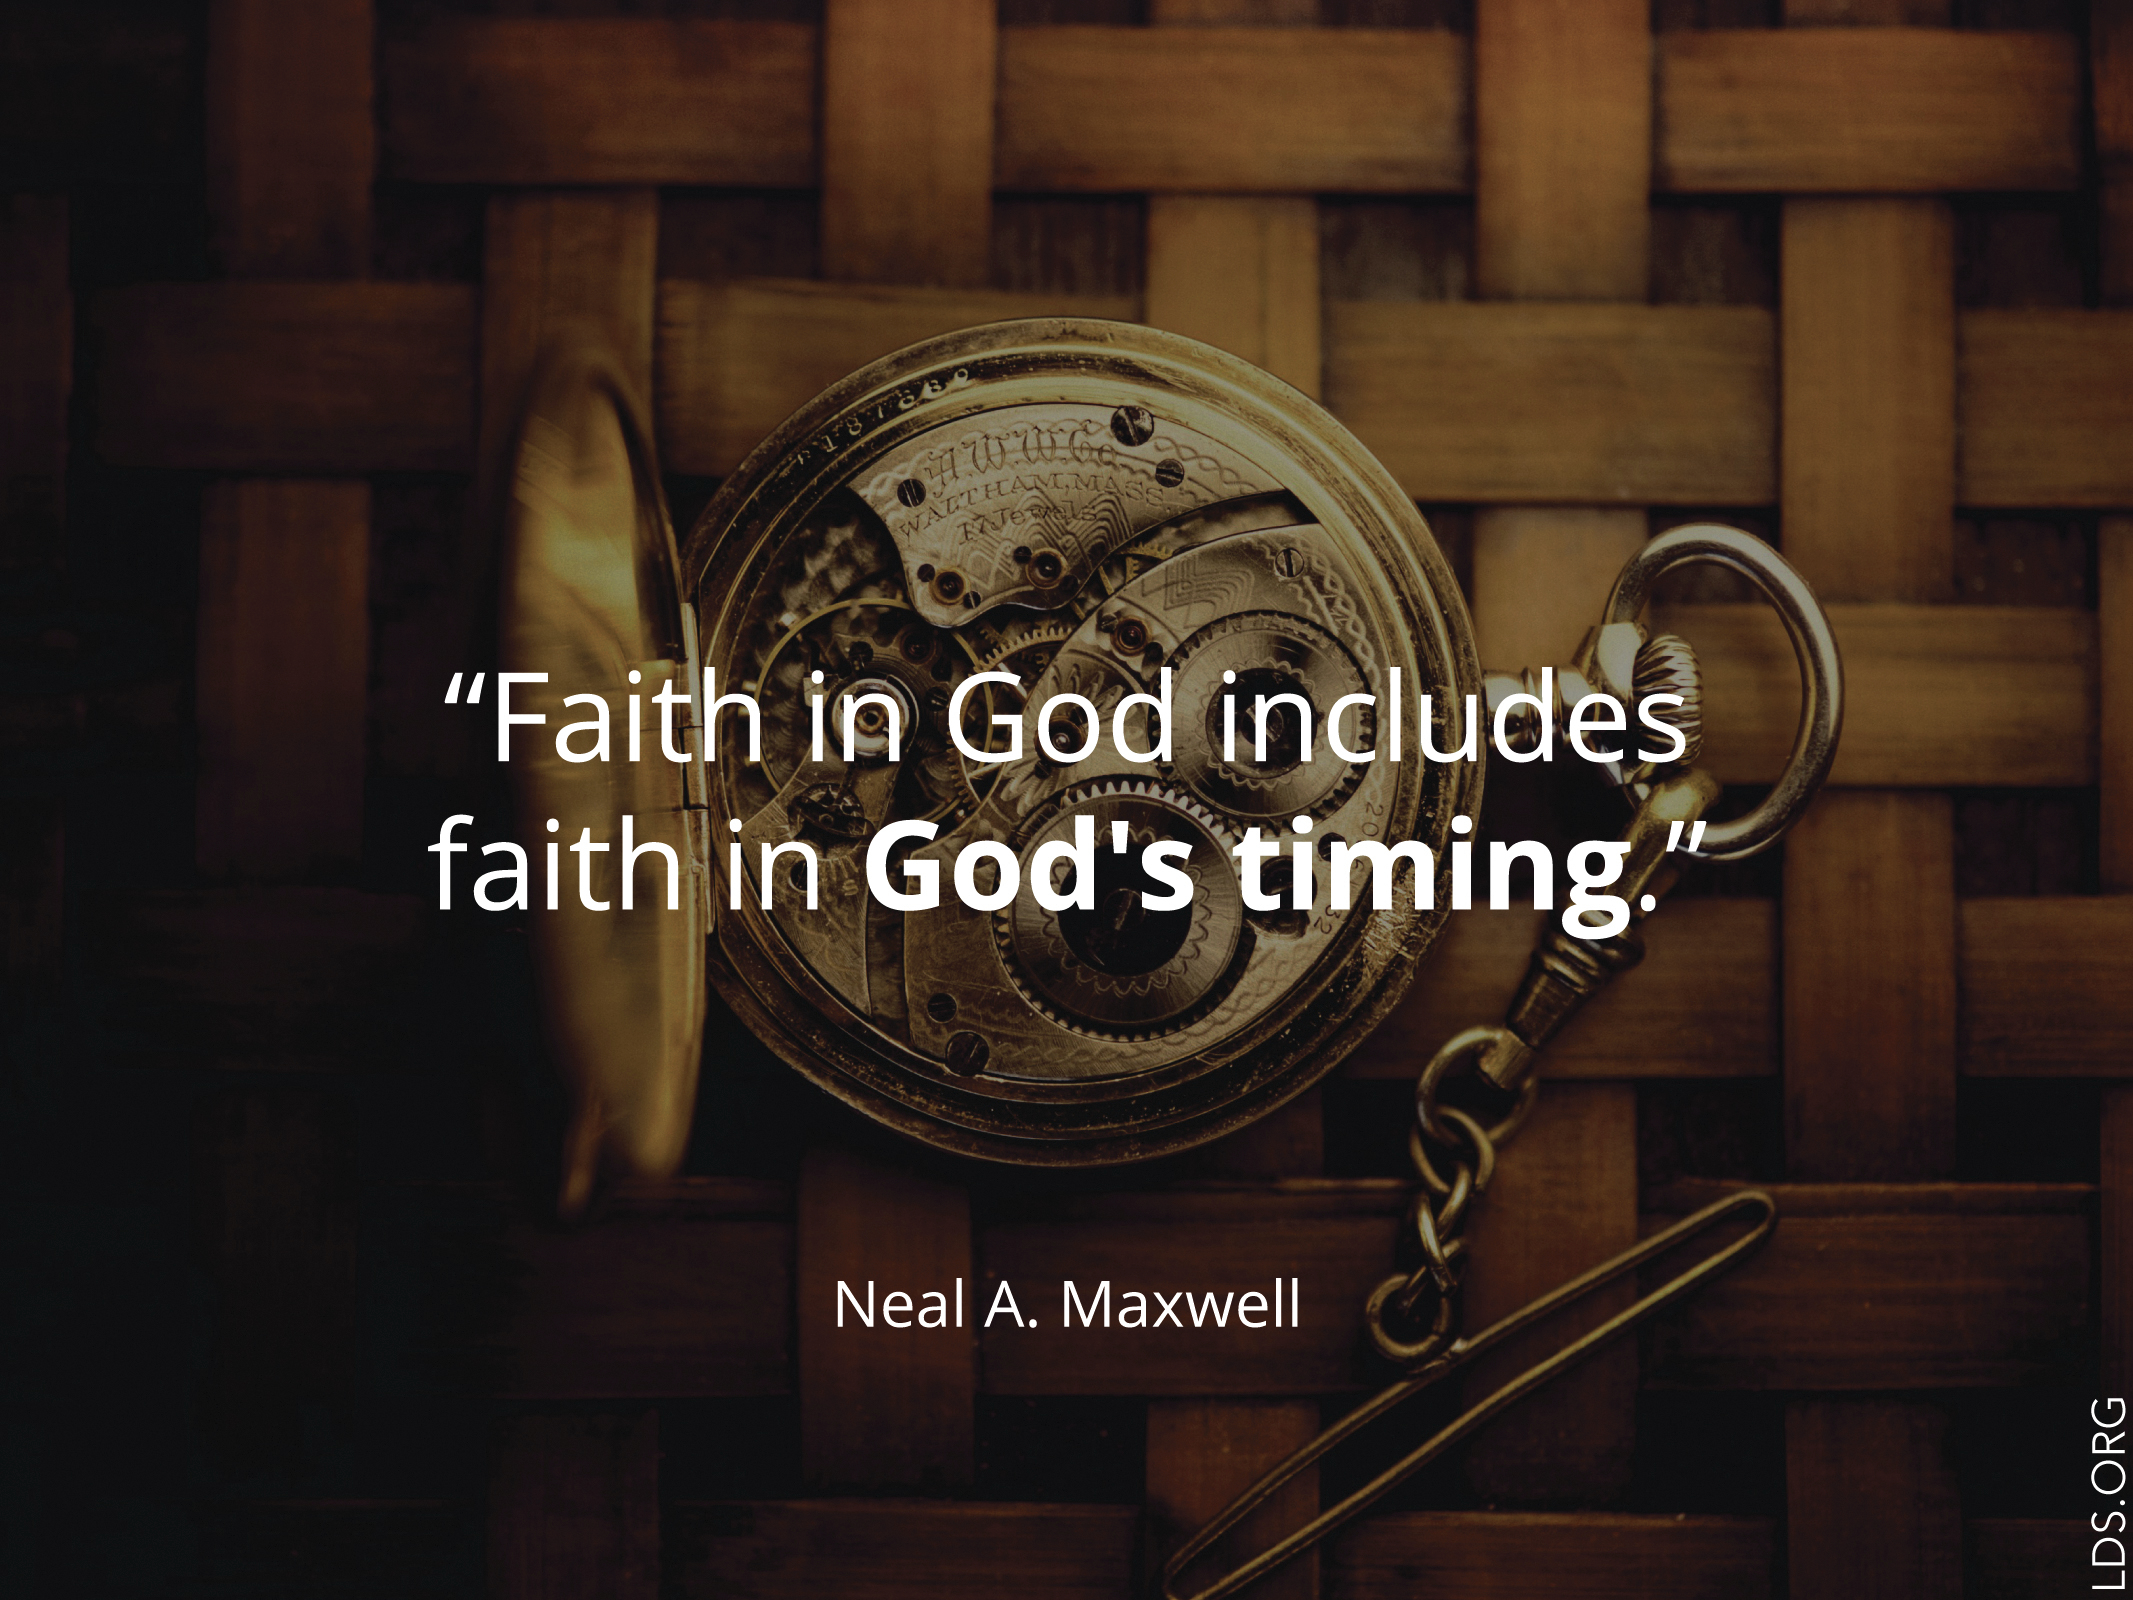 “Faith in God includes faith in God’s timing.”—Elder Neal A. Maxwell, “Lest Ye Be Wearied and Faint in Your Minds”